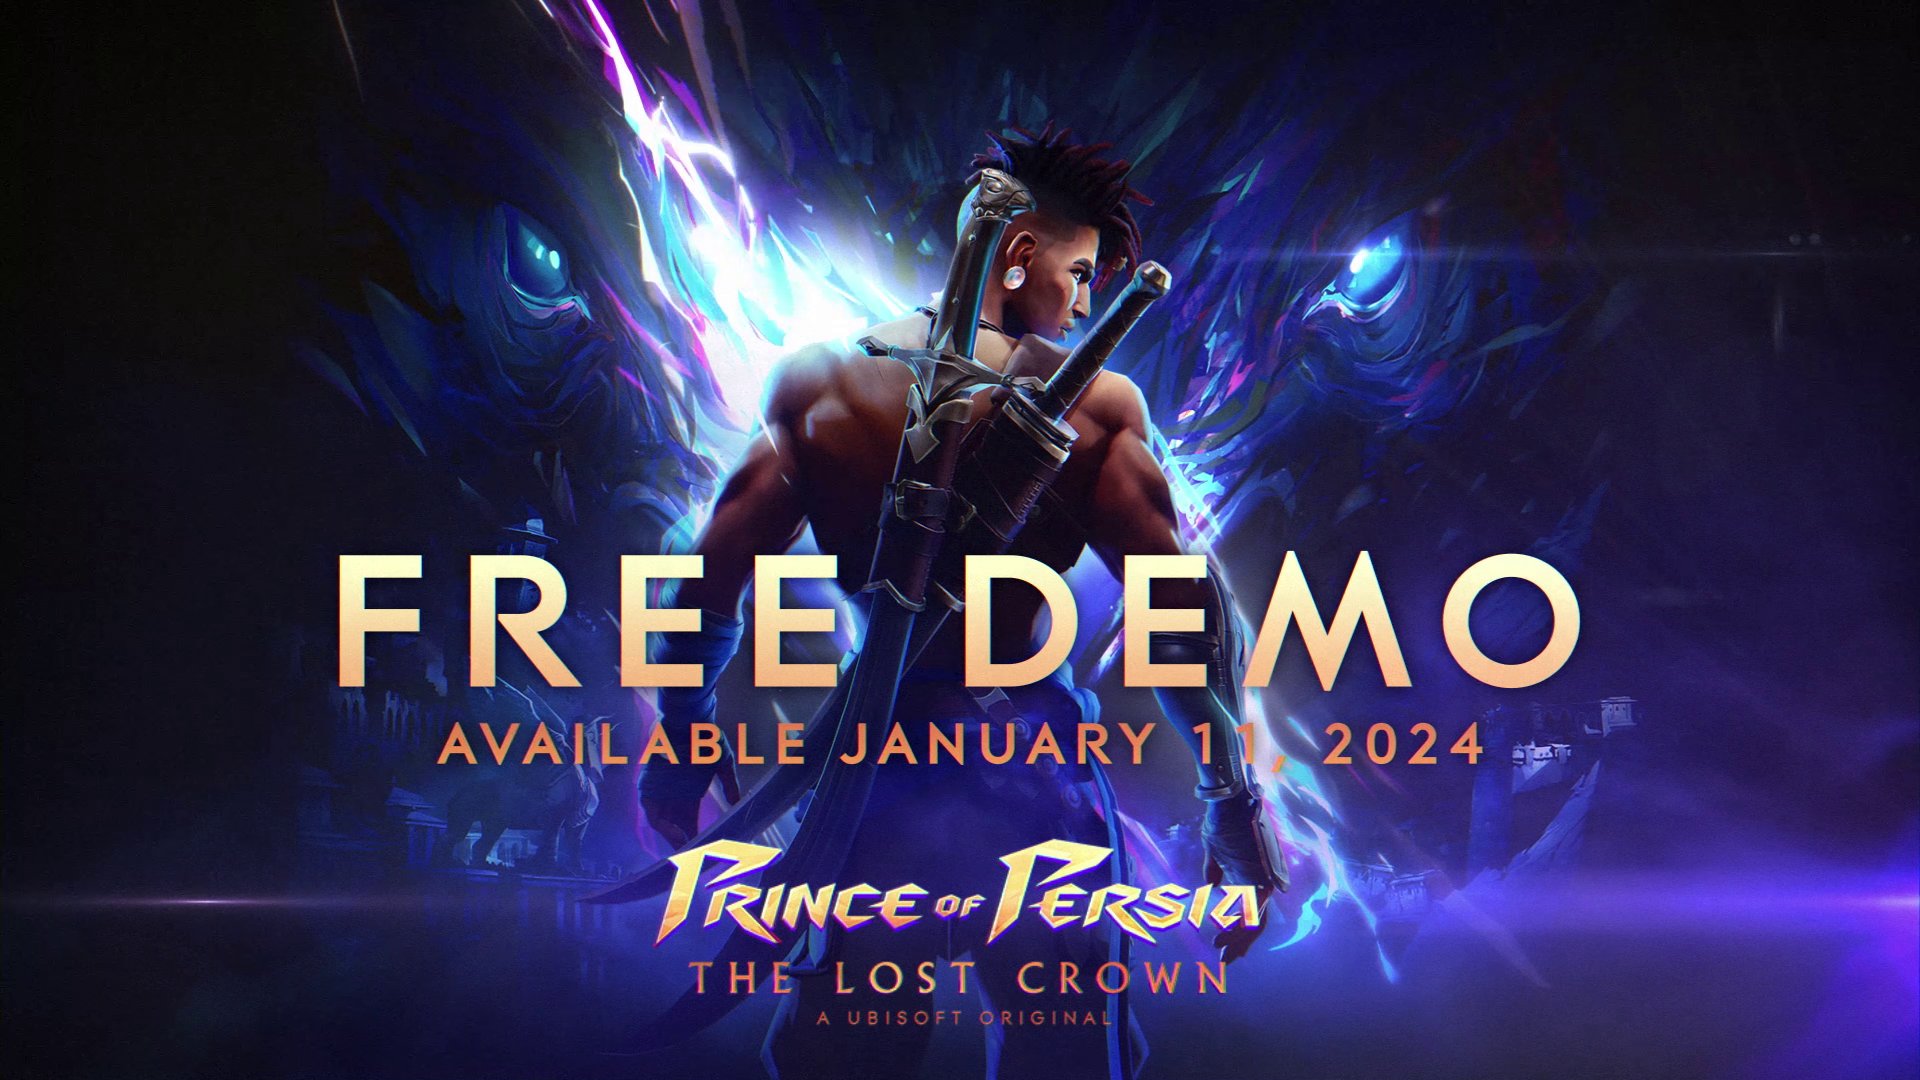 Prince of Persia™: The Lost Crown, Nintendo Switch games